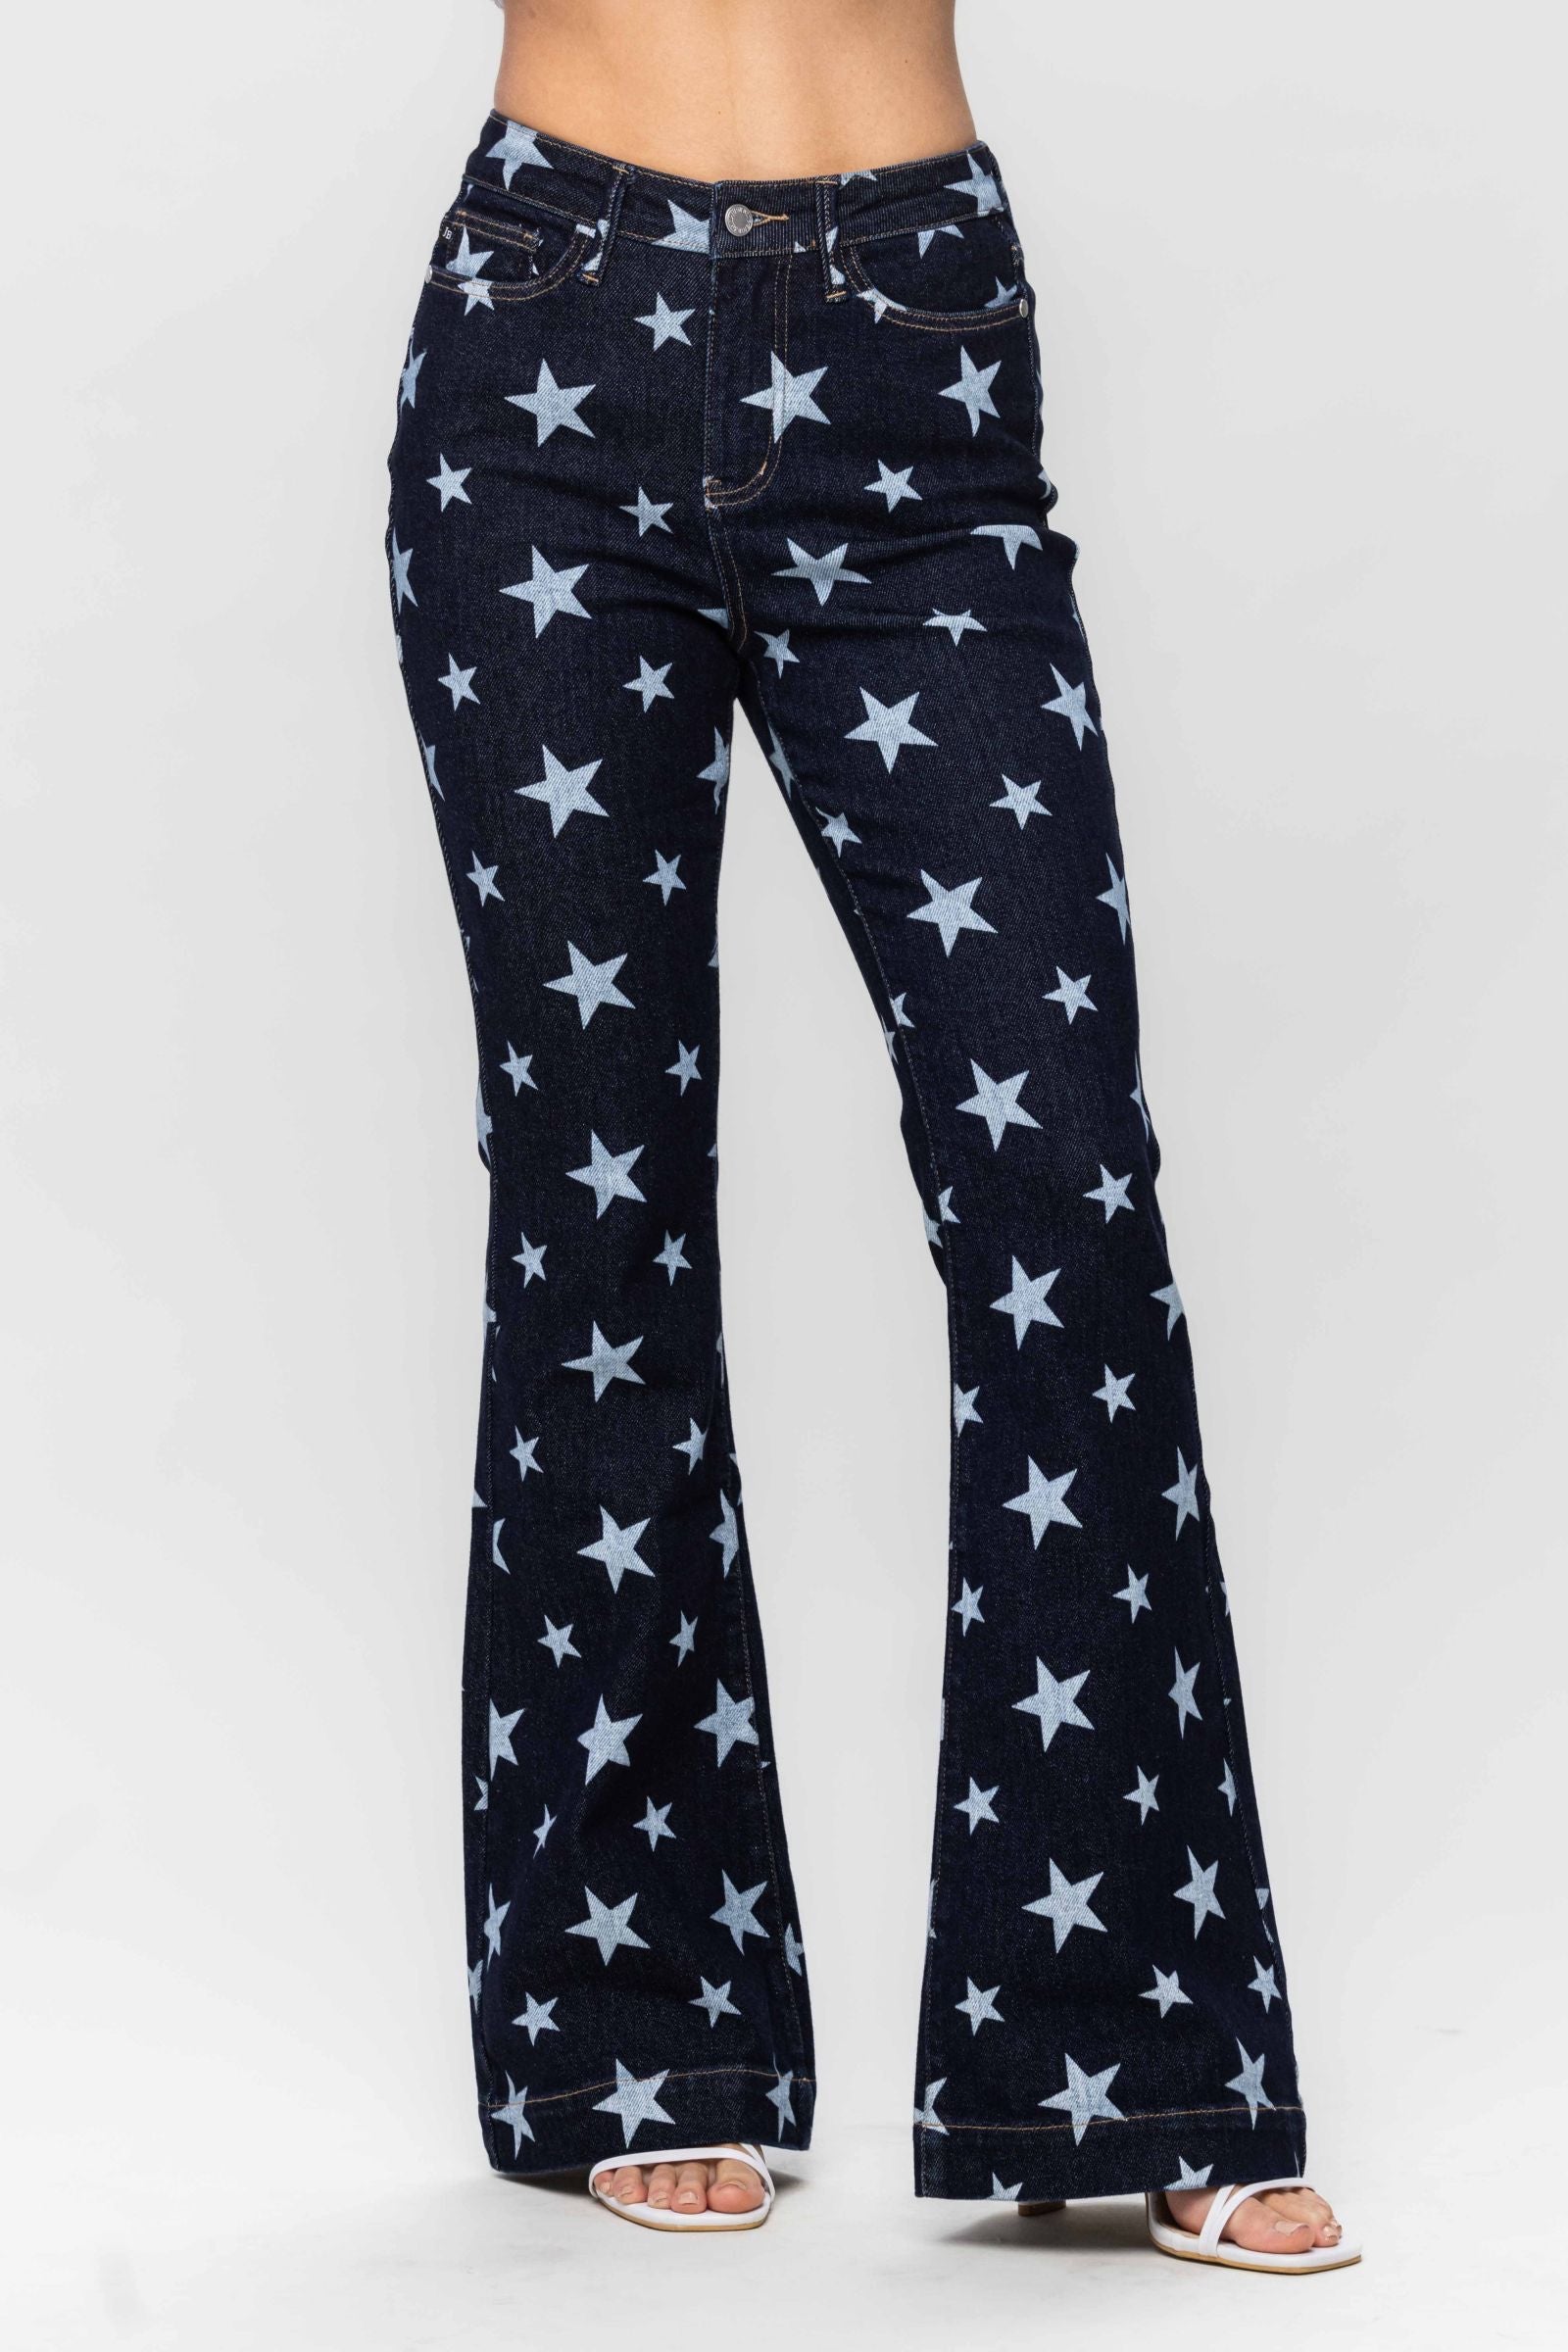 HIGH WAIST ALL OVER STAR PRINT RINSE WASH FLARE